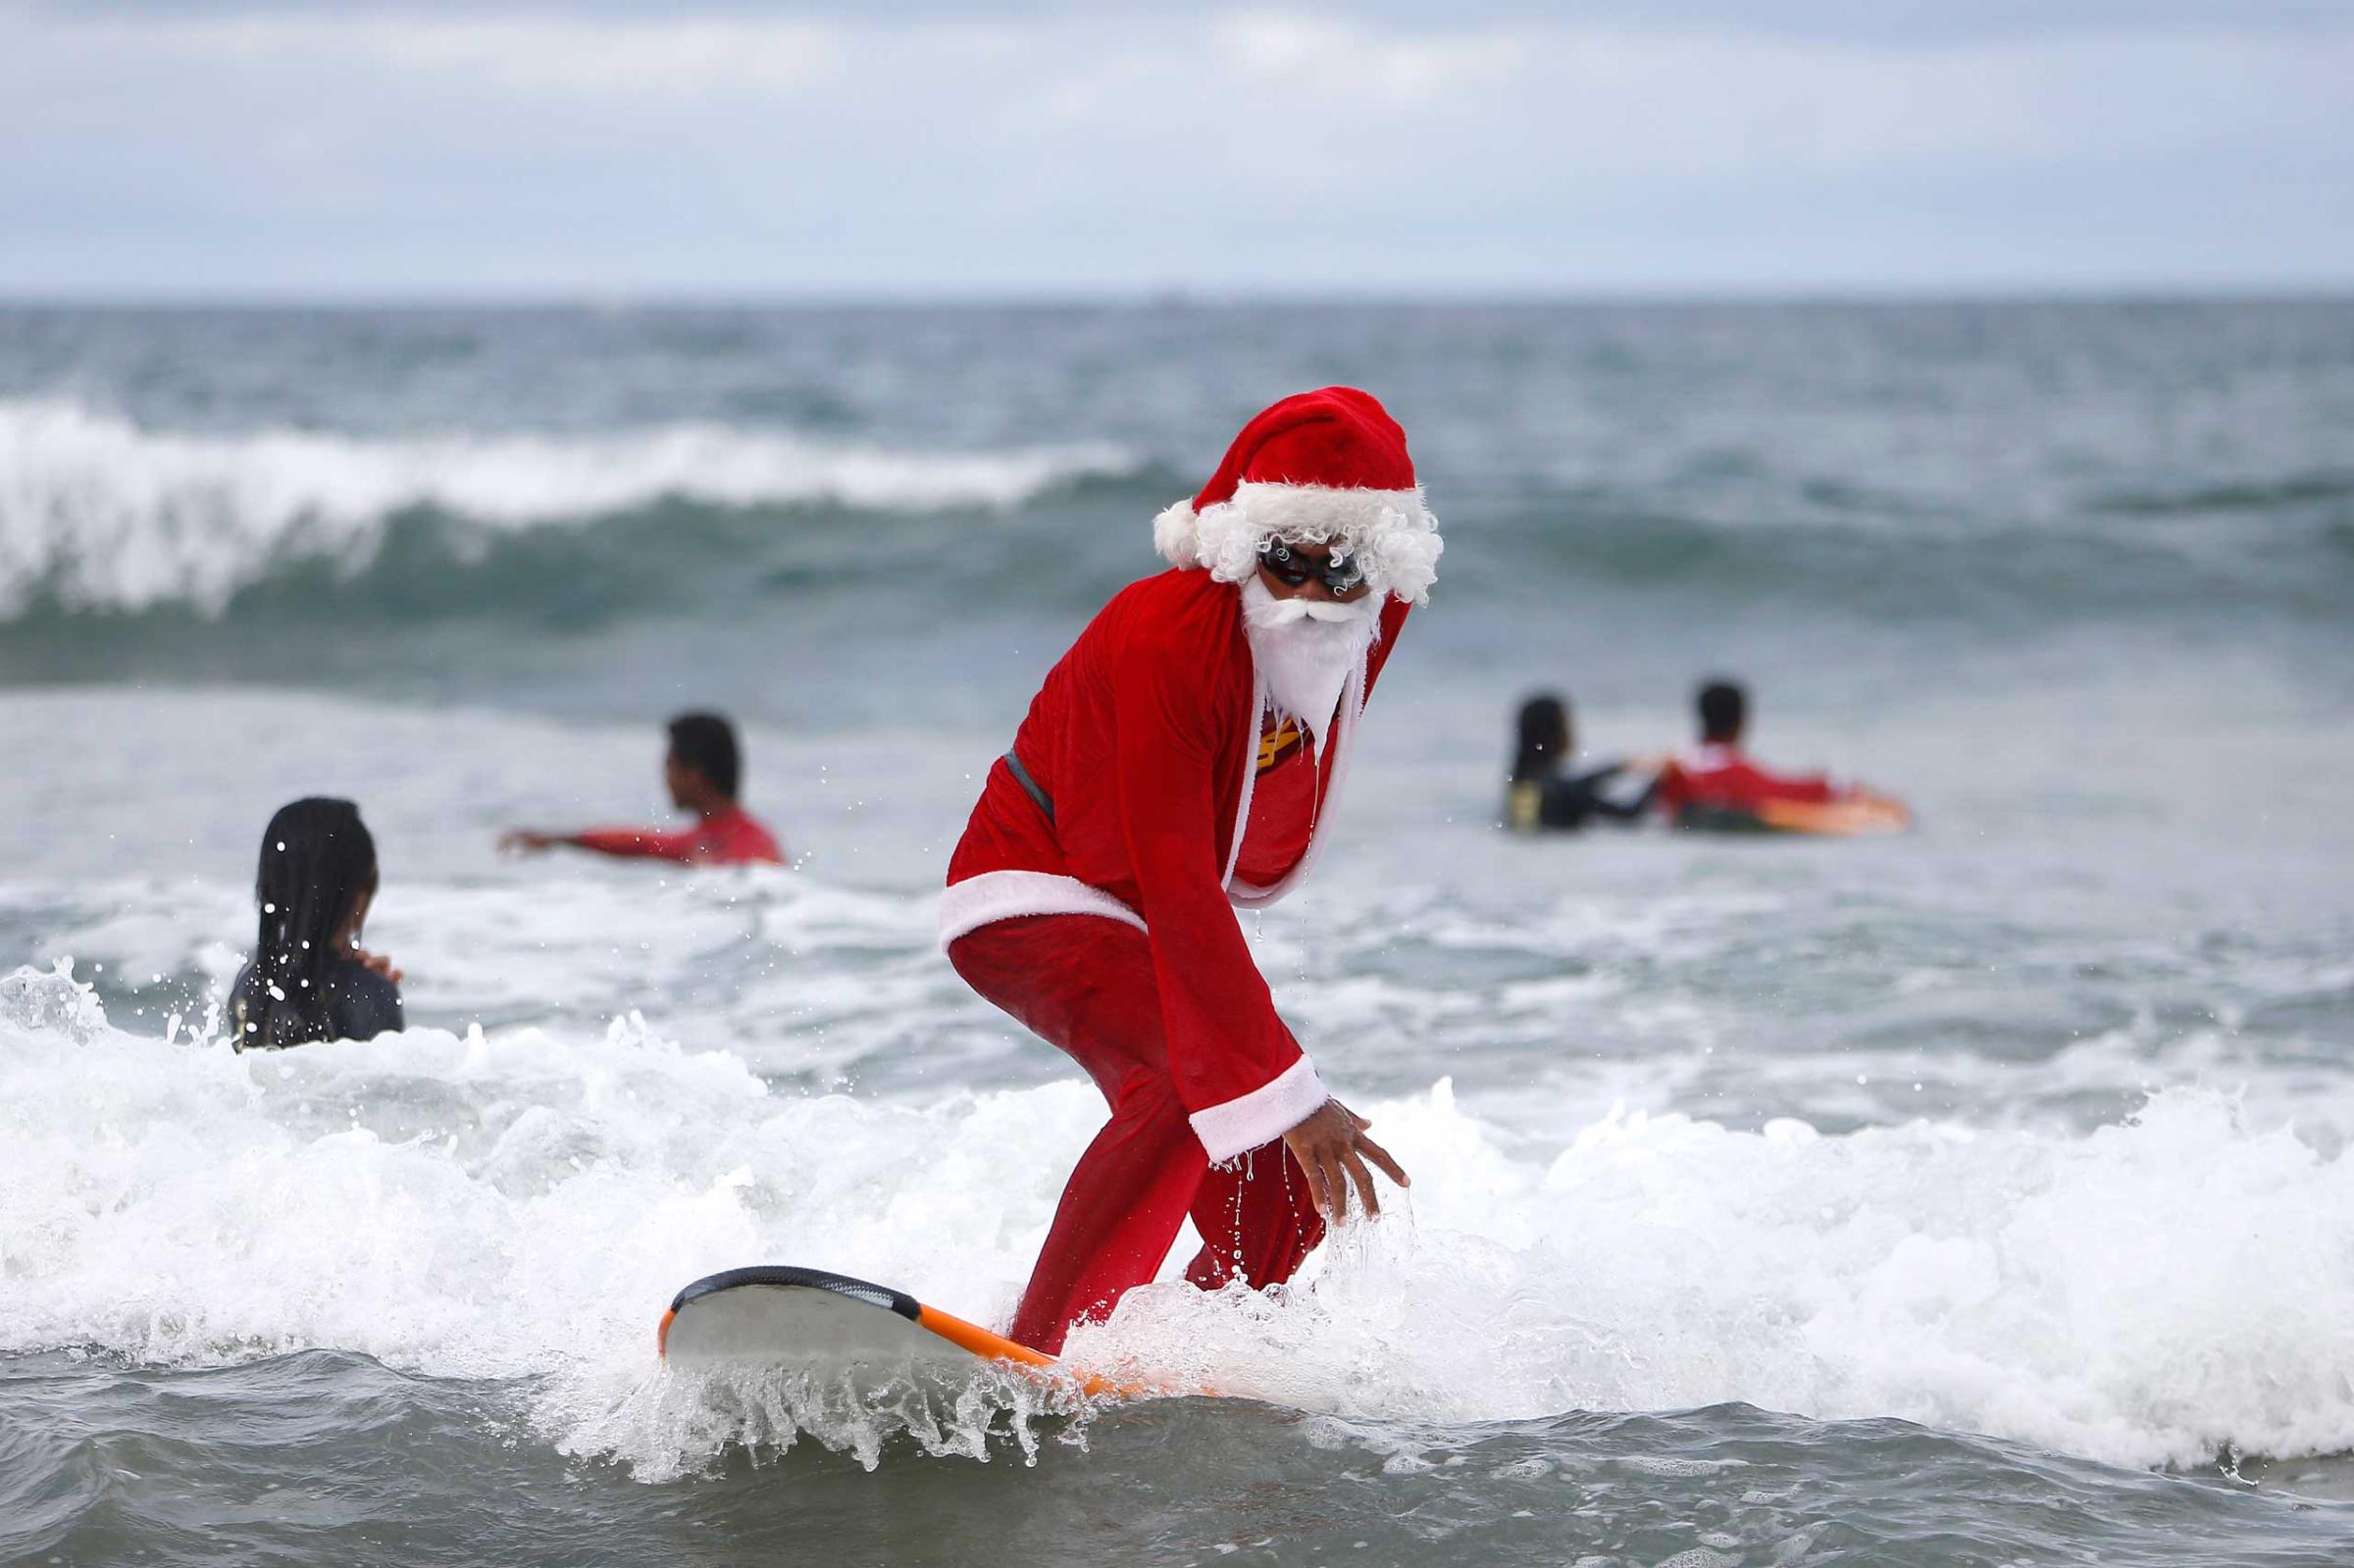 A Balinese man dressed as Santa Claus teaches orphan children how to surf at a beach in Bali, Indonesia on Dec. 7, 2014.